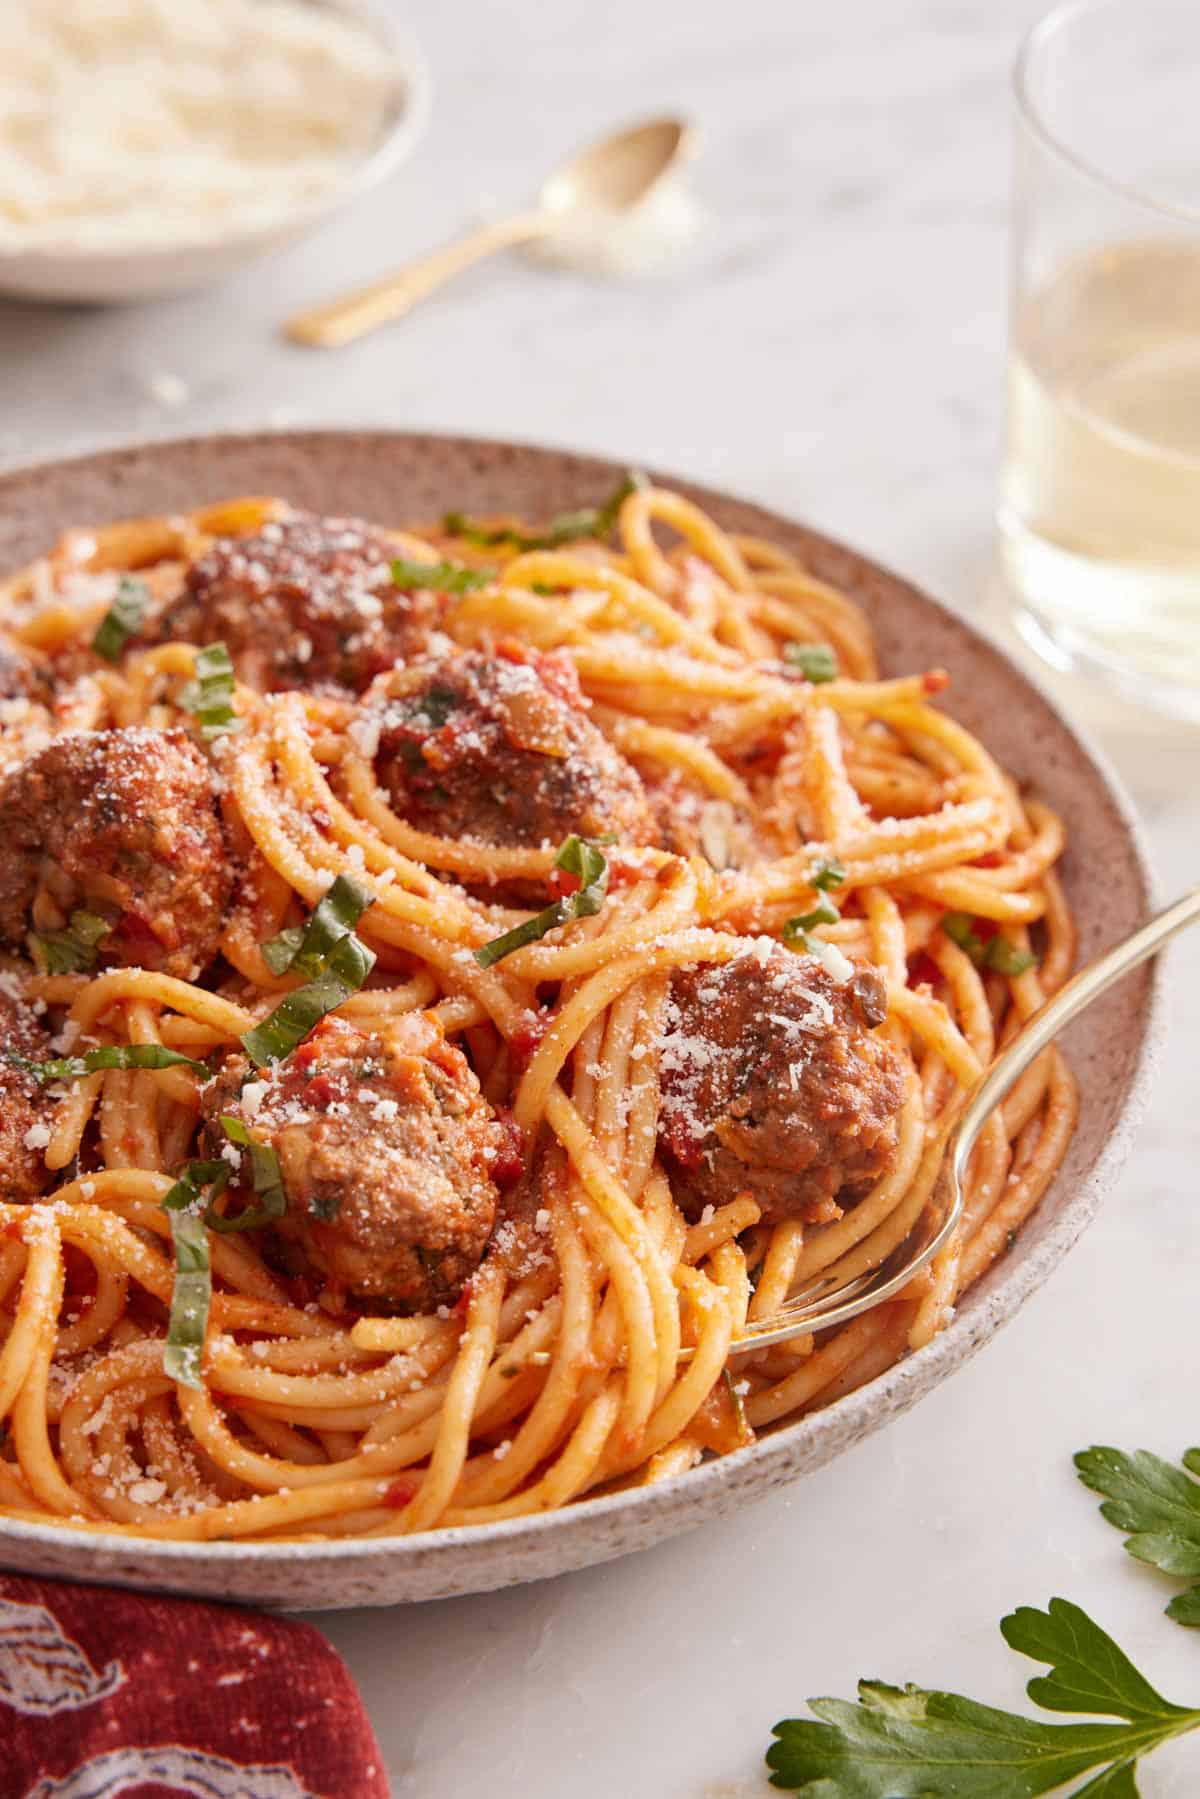 A close view of a plate of spaghetti and meatballs with a fork tucked in with a glass of wine in the back.